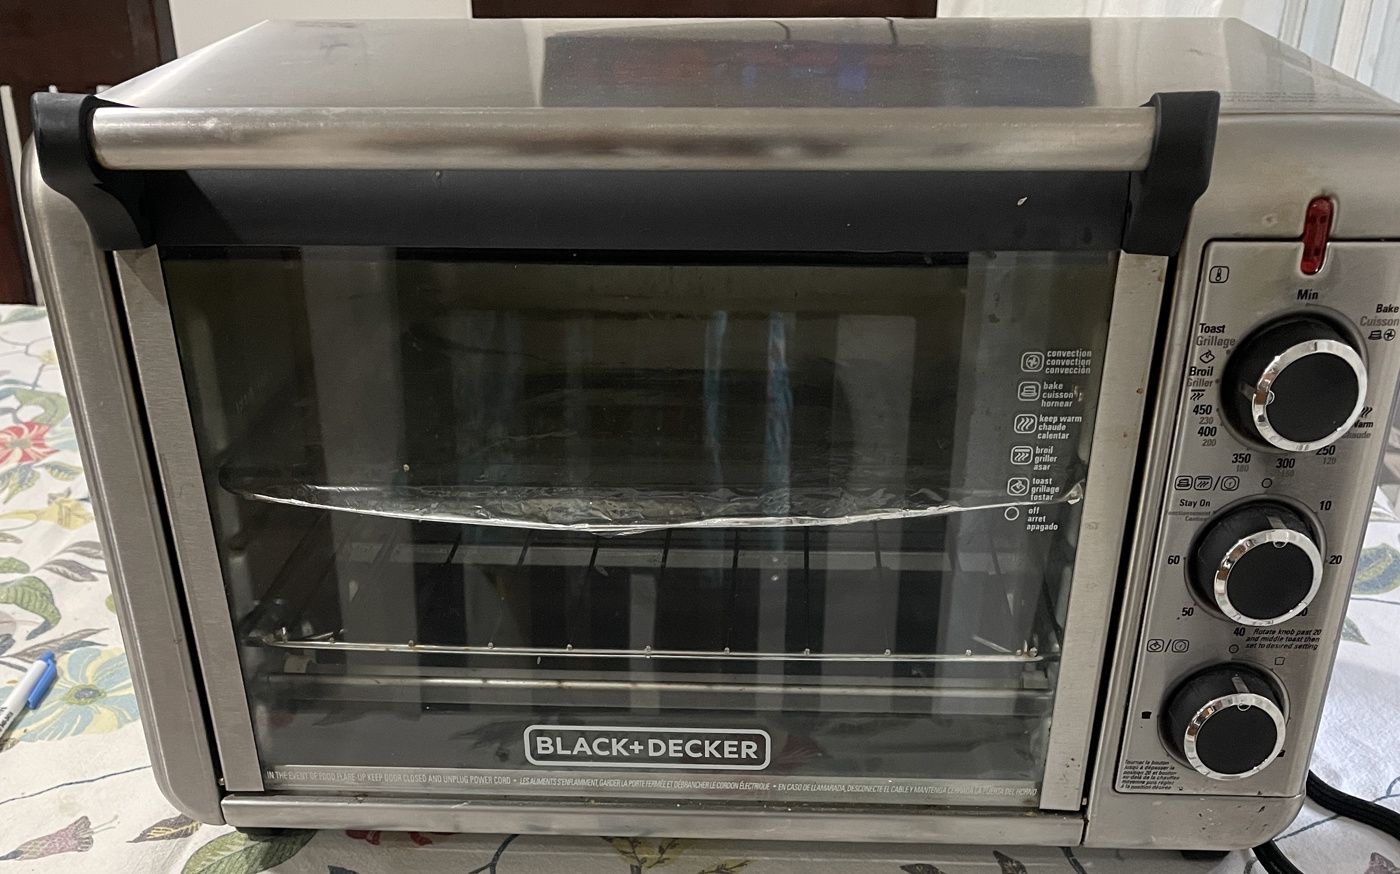 BLACK+DECKER TO3000G 6-Slice Convection Countertop Toaster Oven